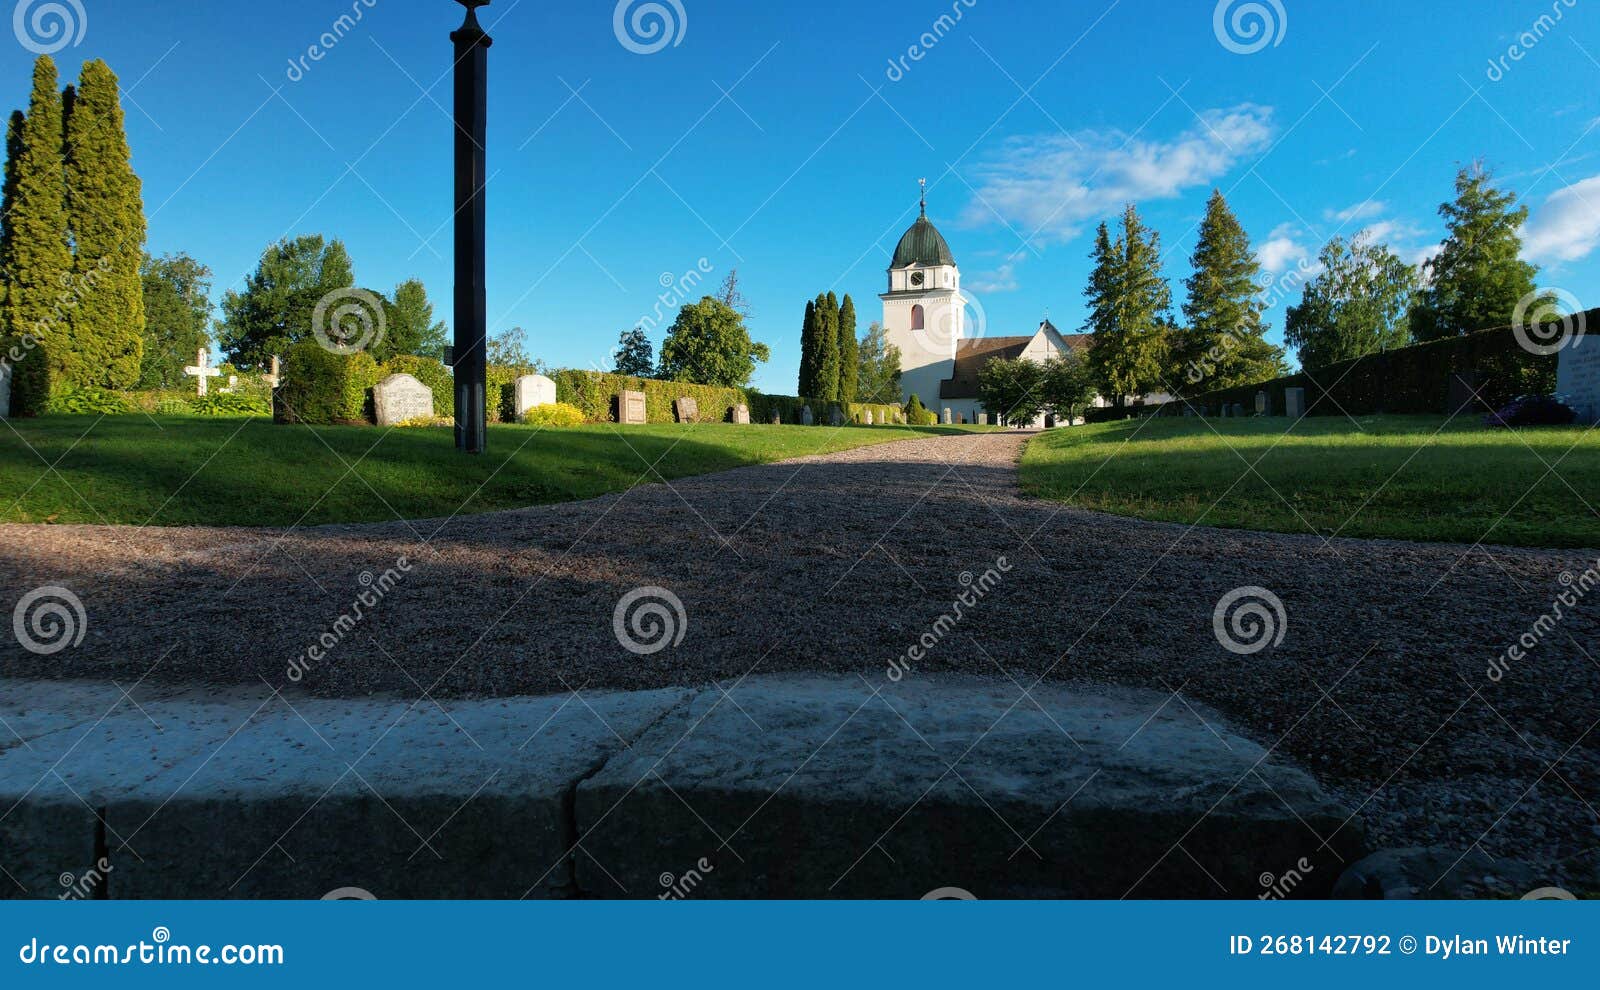 low angle view church in the picturesque town rattvik in sweden